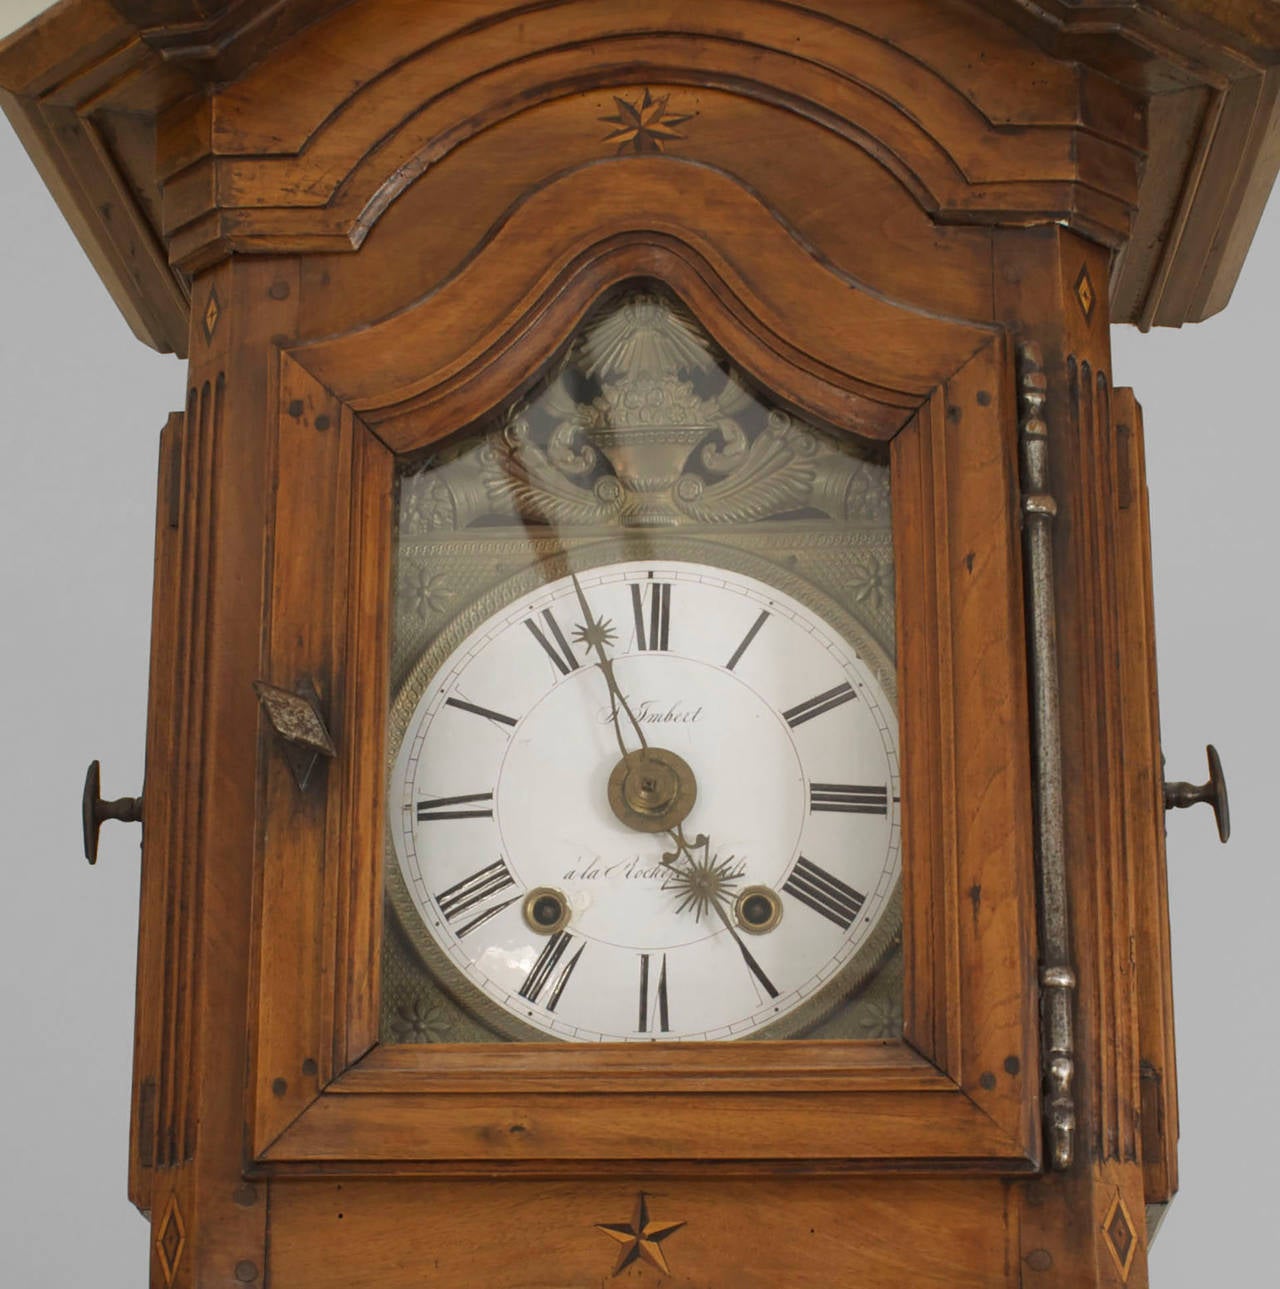 French Provincial (Mid-18th Century) walnut grandfather clock with fruitwood inlay and fluted sides. (Not working)
